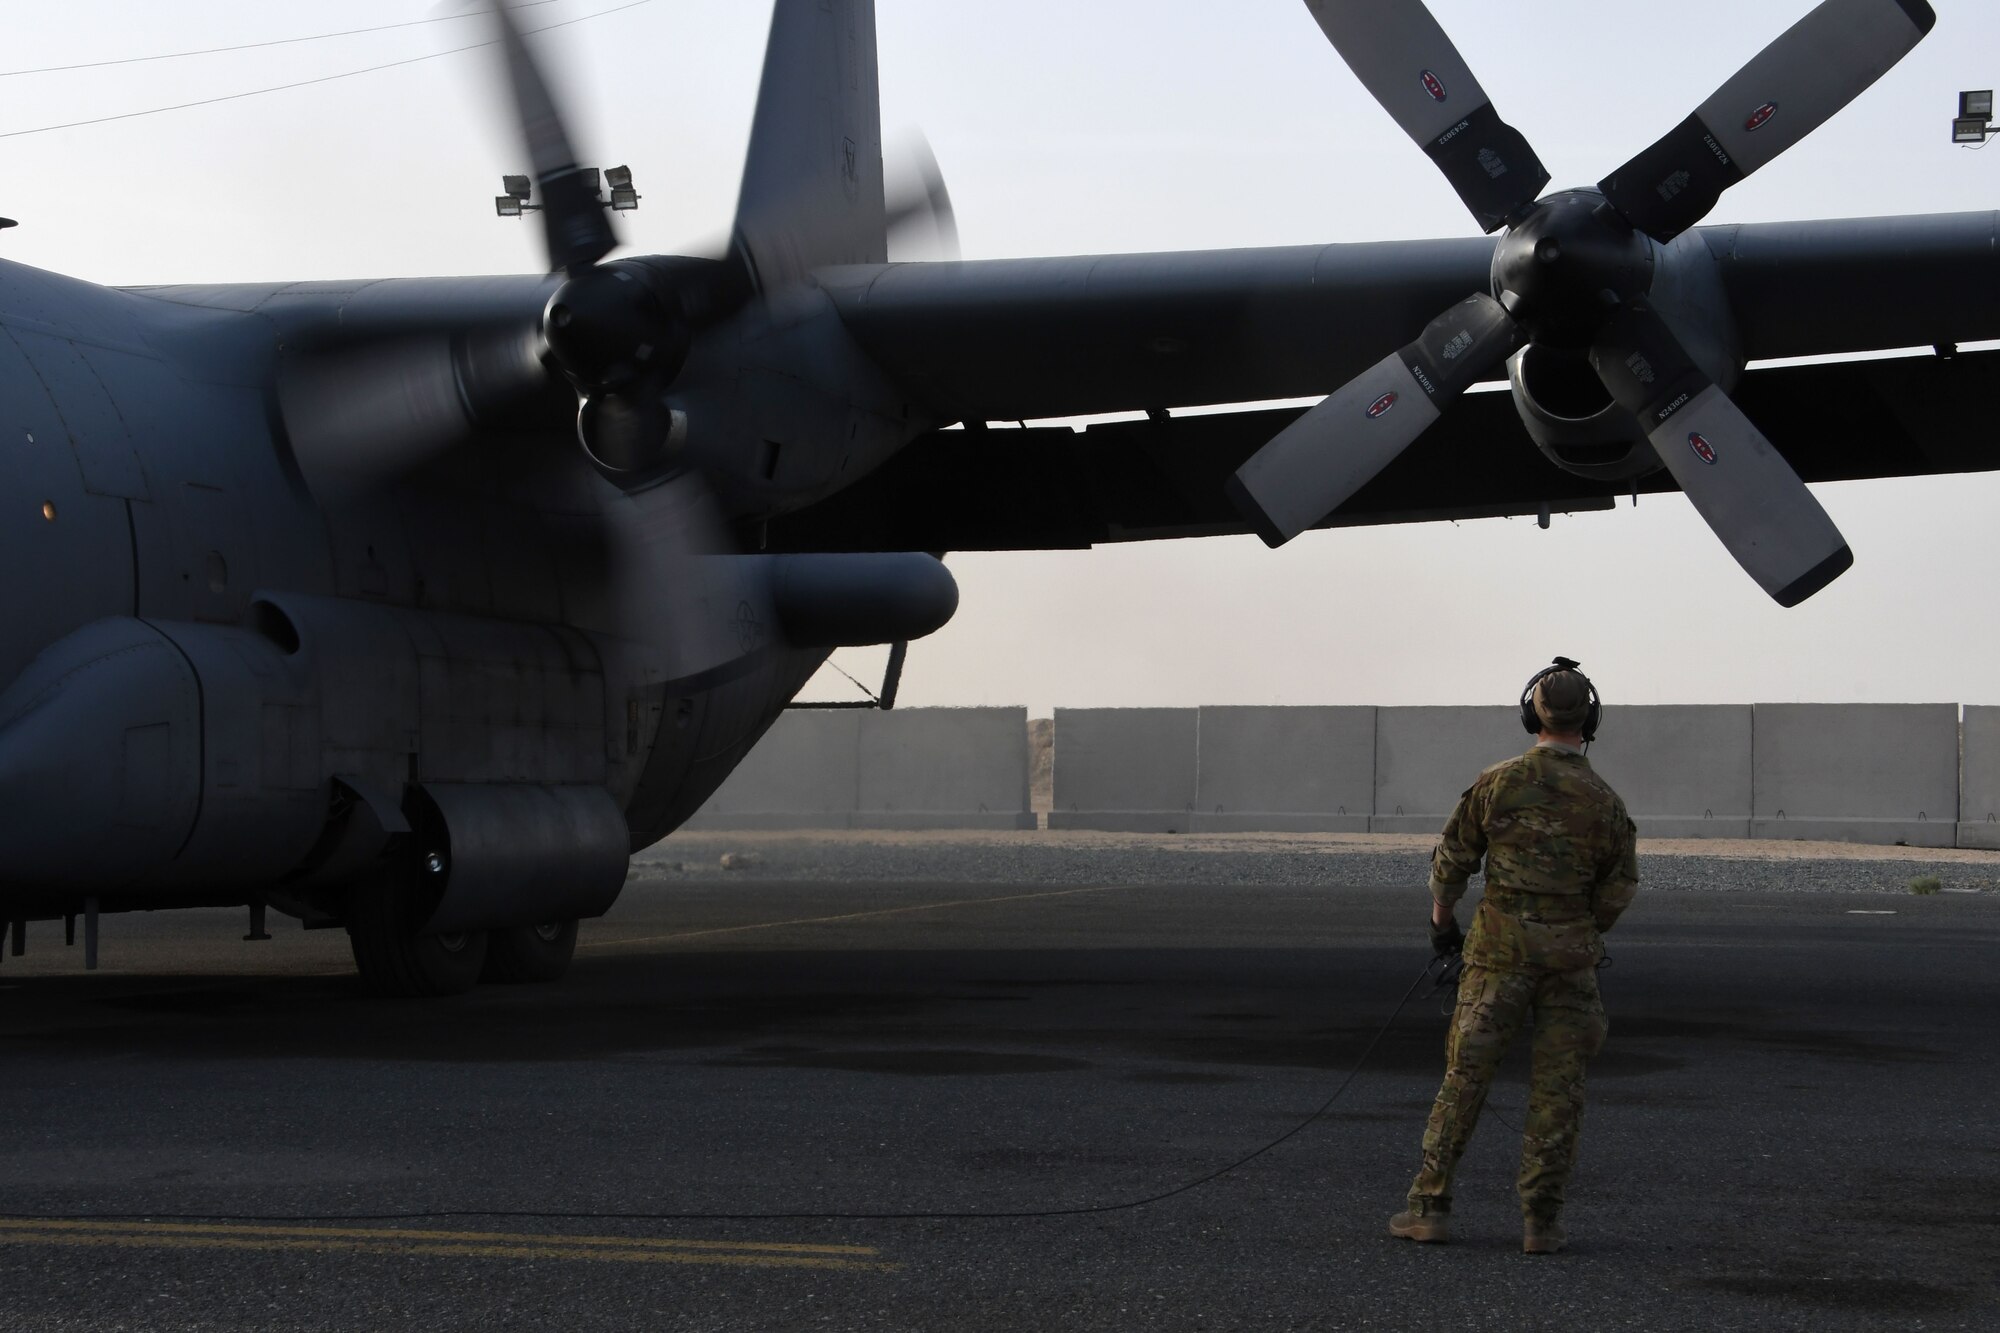 A 386th Expeditionary Operations Group airborne maintenance technician monitors an EC-130H Compass Call as it starts its engines on Dec. 5, 2016 at an undisclosed location in Southwest Asia. The Compass Call is engaged in operations jamming Da’esh communications in order to confuse and disorient enemy fighters. (U.S. Air Force photo/Senior Airman Andrew Park)